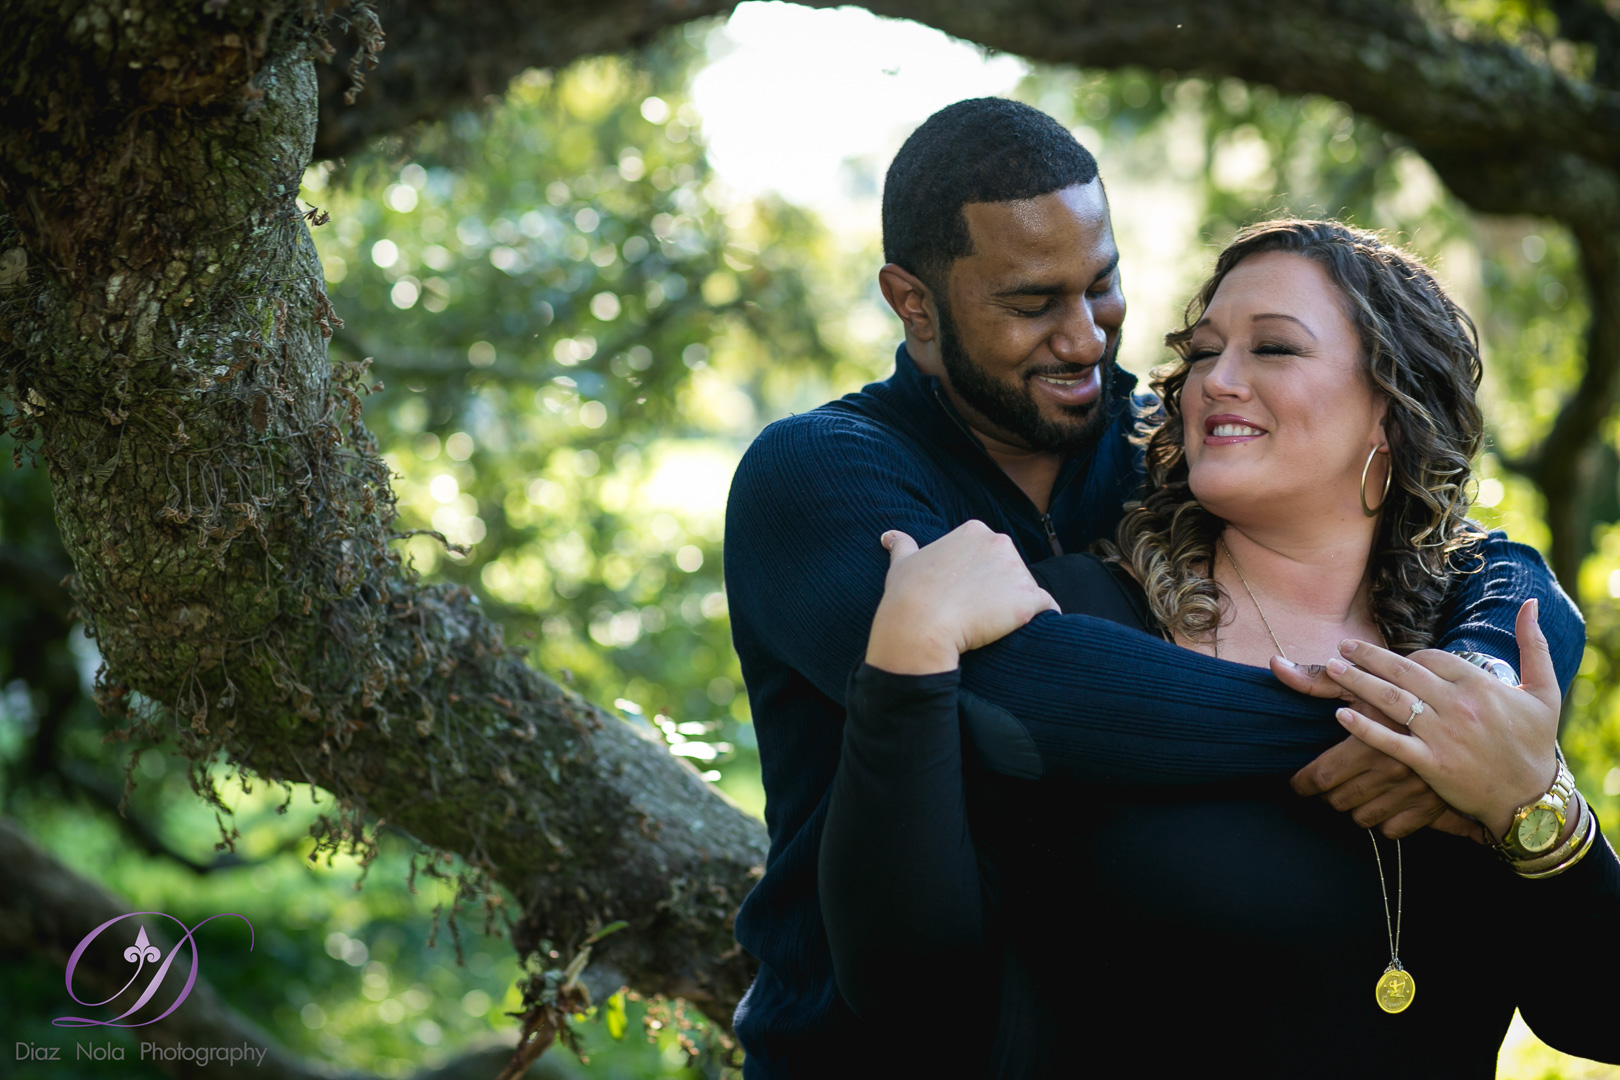 Emilyn & Justin Engagement Portrait Photography (8 of 22)